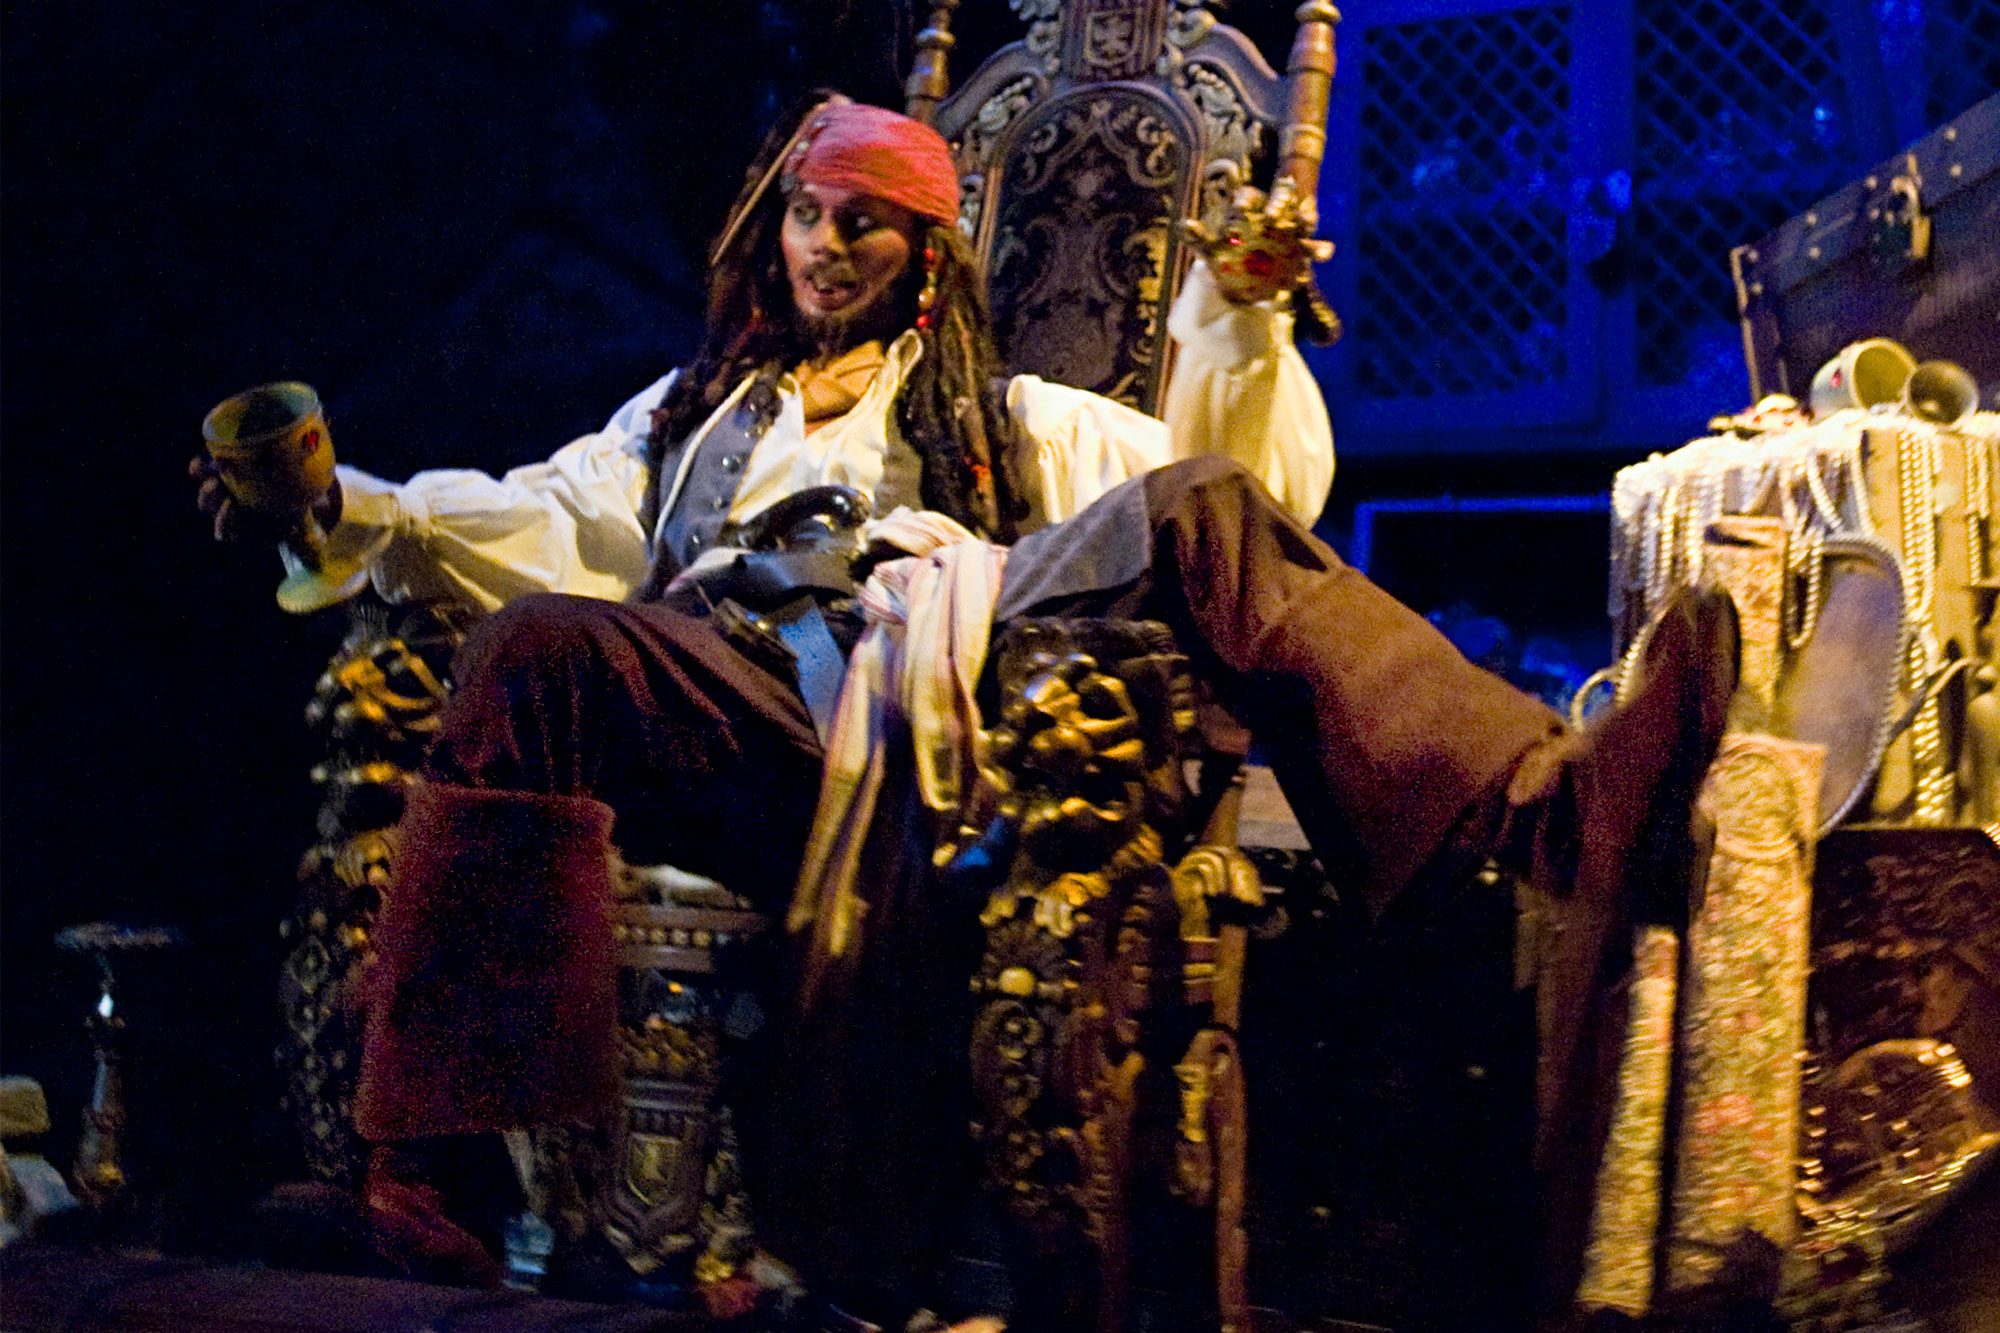 Disneyland's 'Pirates of the Caribbean' attraction reopens, with a familiar face